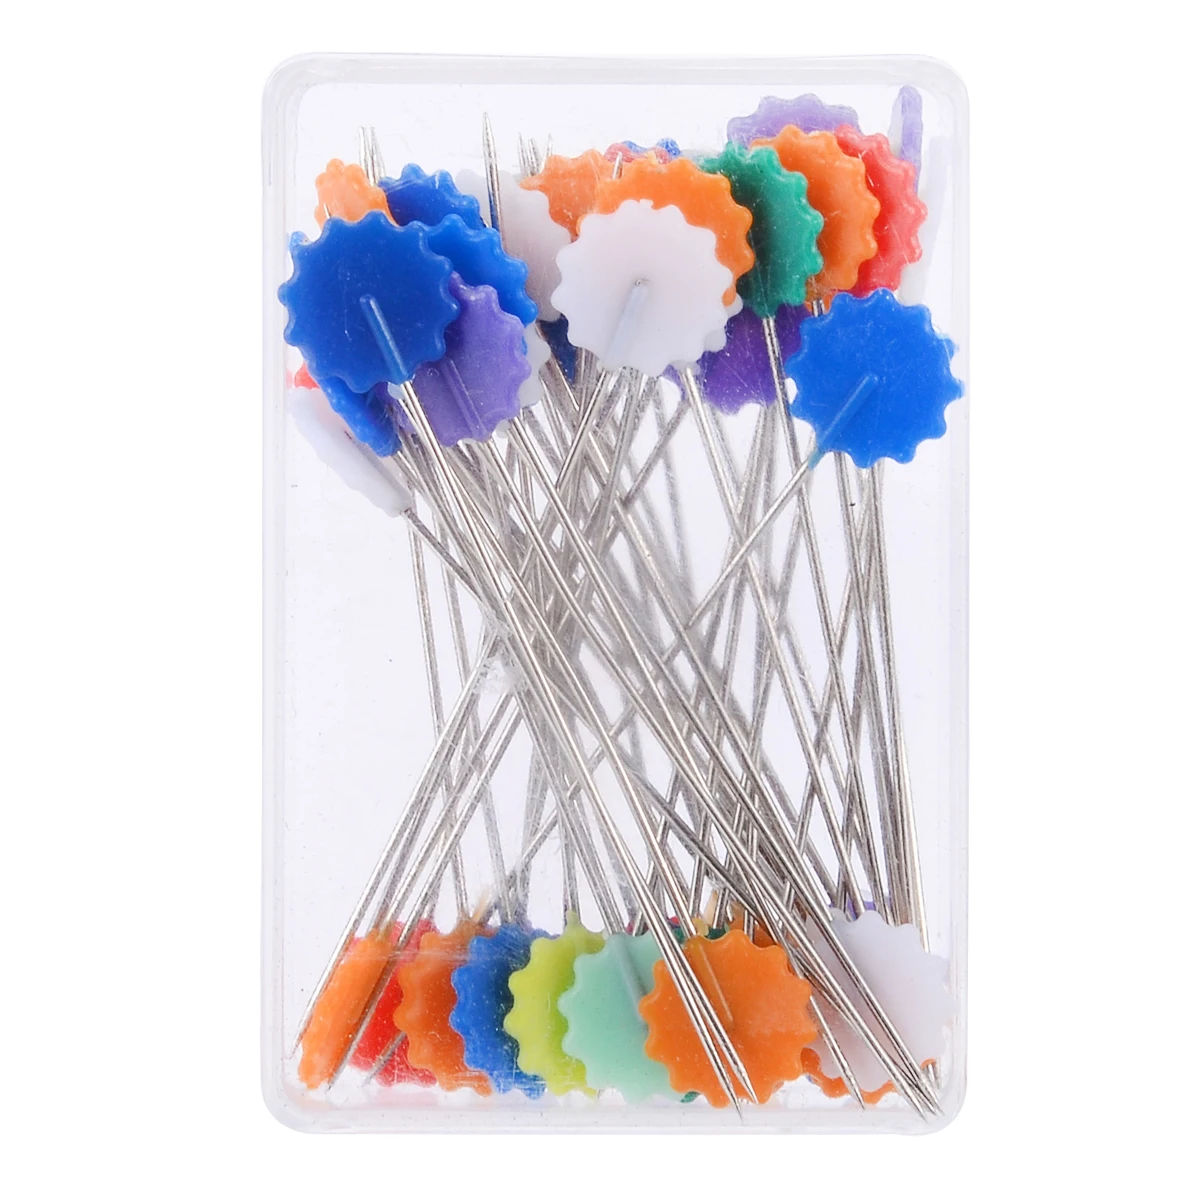 100Pcs Patchwork Tools Button Flower Head Sewing Pins Knitting Needle Sewing Contacts Quilting Accessories DIY Craft Color: 2 # Flower 2